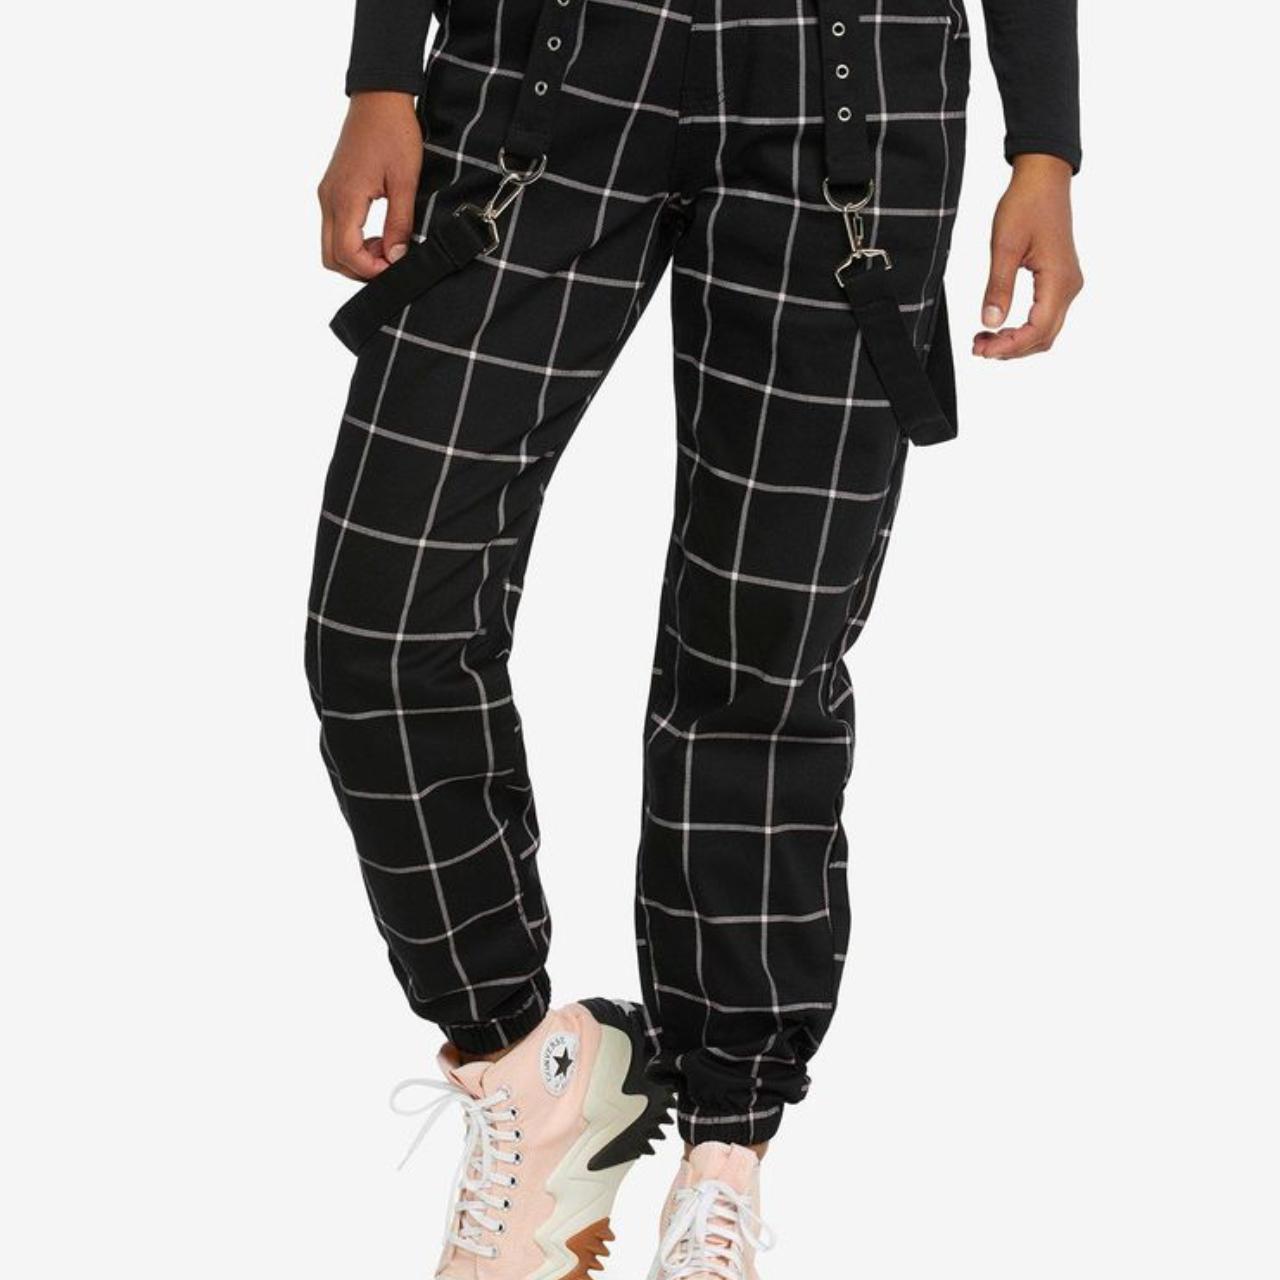 Hot Topic Plaid Cargo Pants for Women